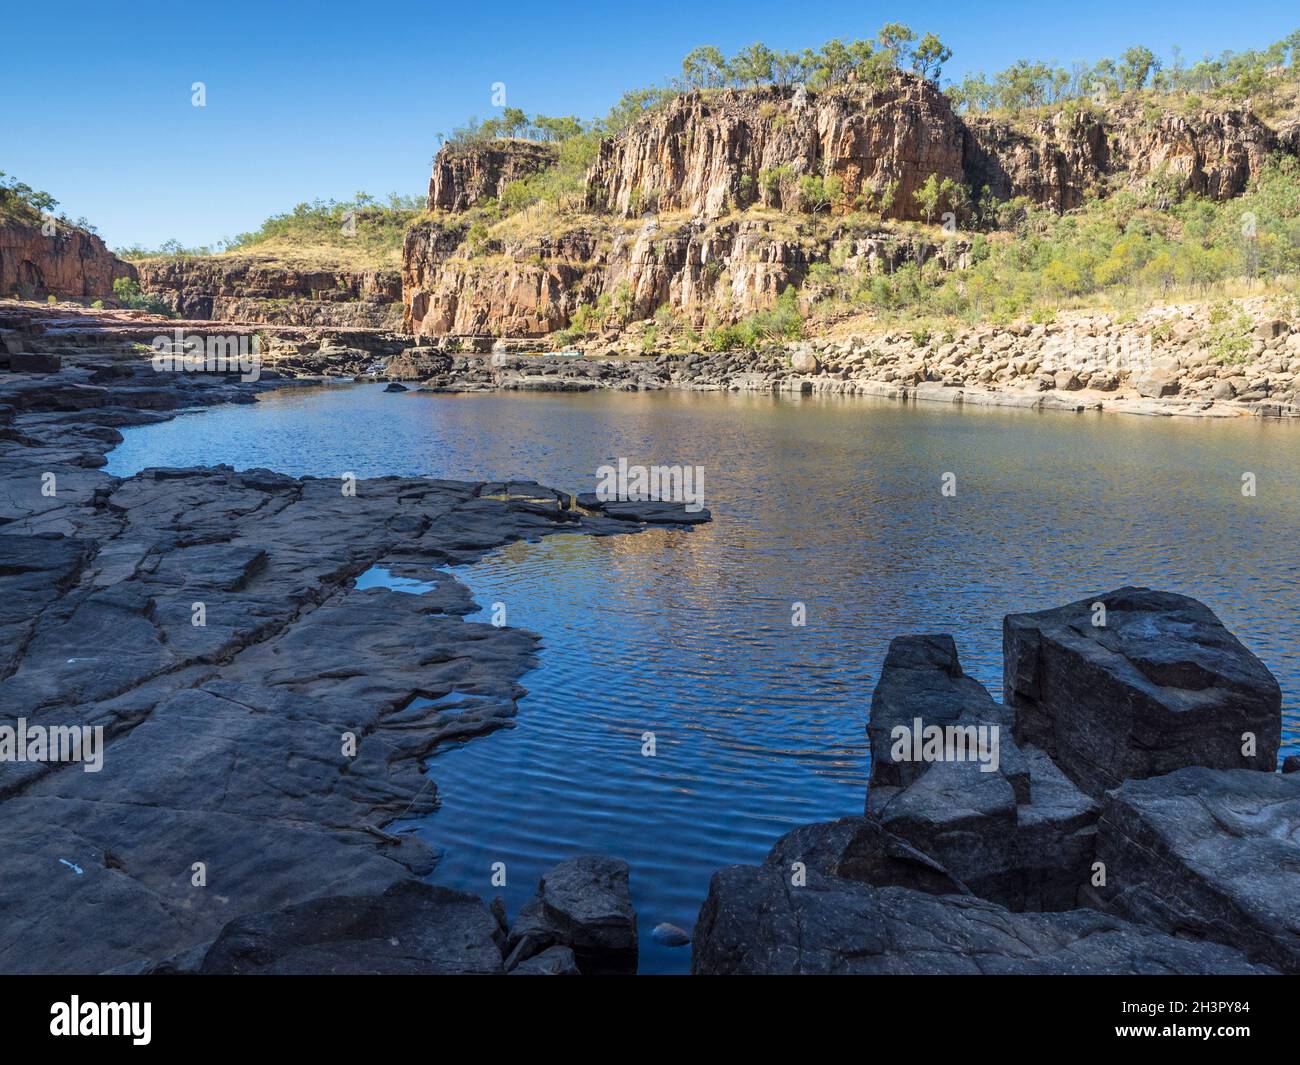 Rock pools between the first and second gorges, Nitmiluk National Park, Northern Territory Stock Photo